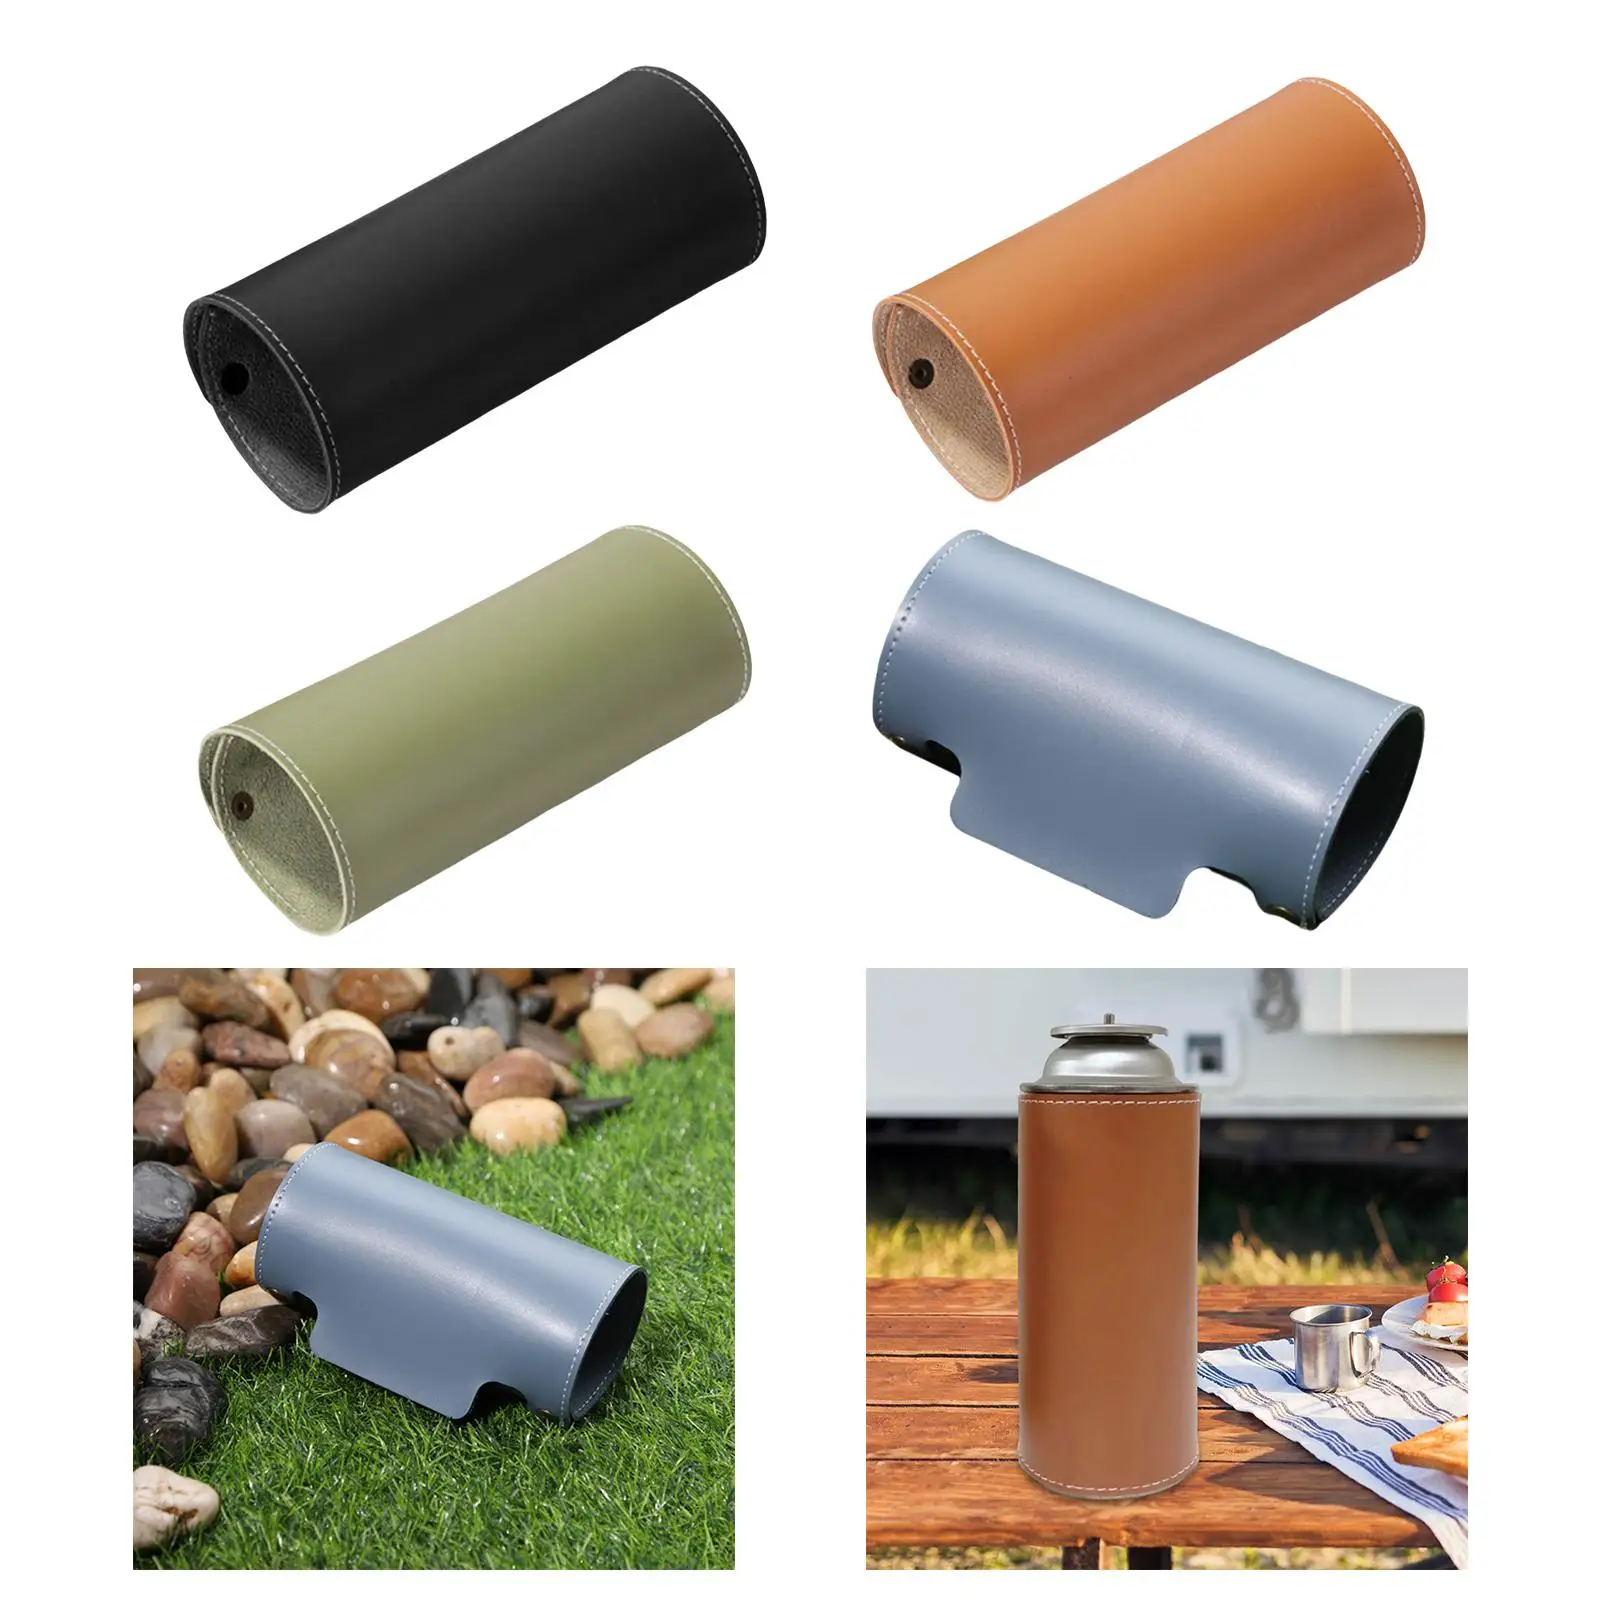 Gas Canister Cover Simple Using Durable Protector for Cooking Hiking Camping